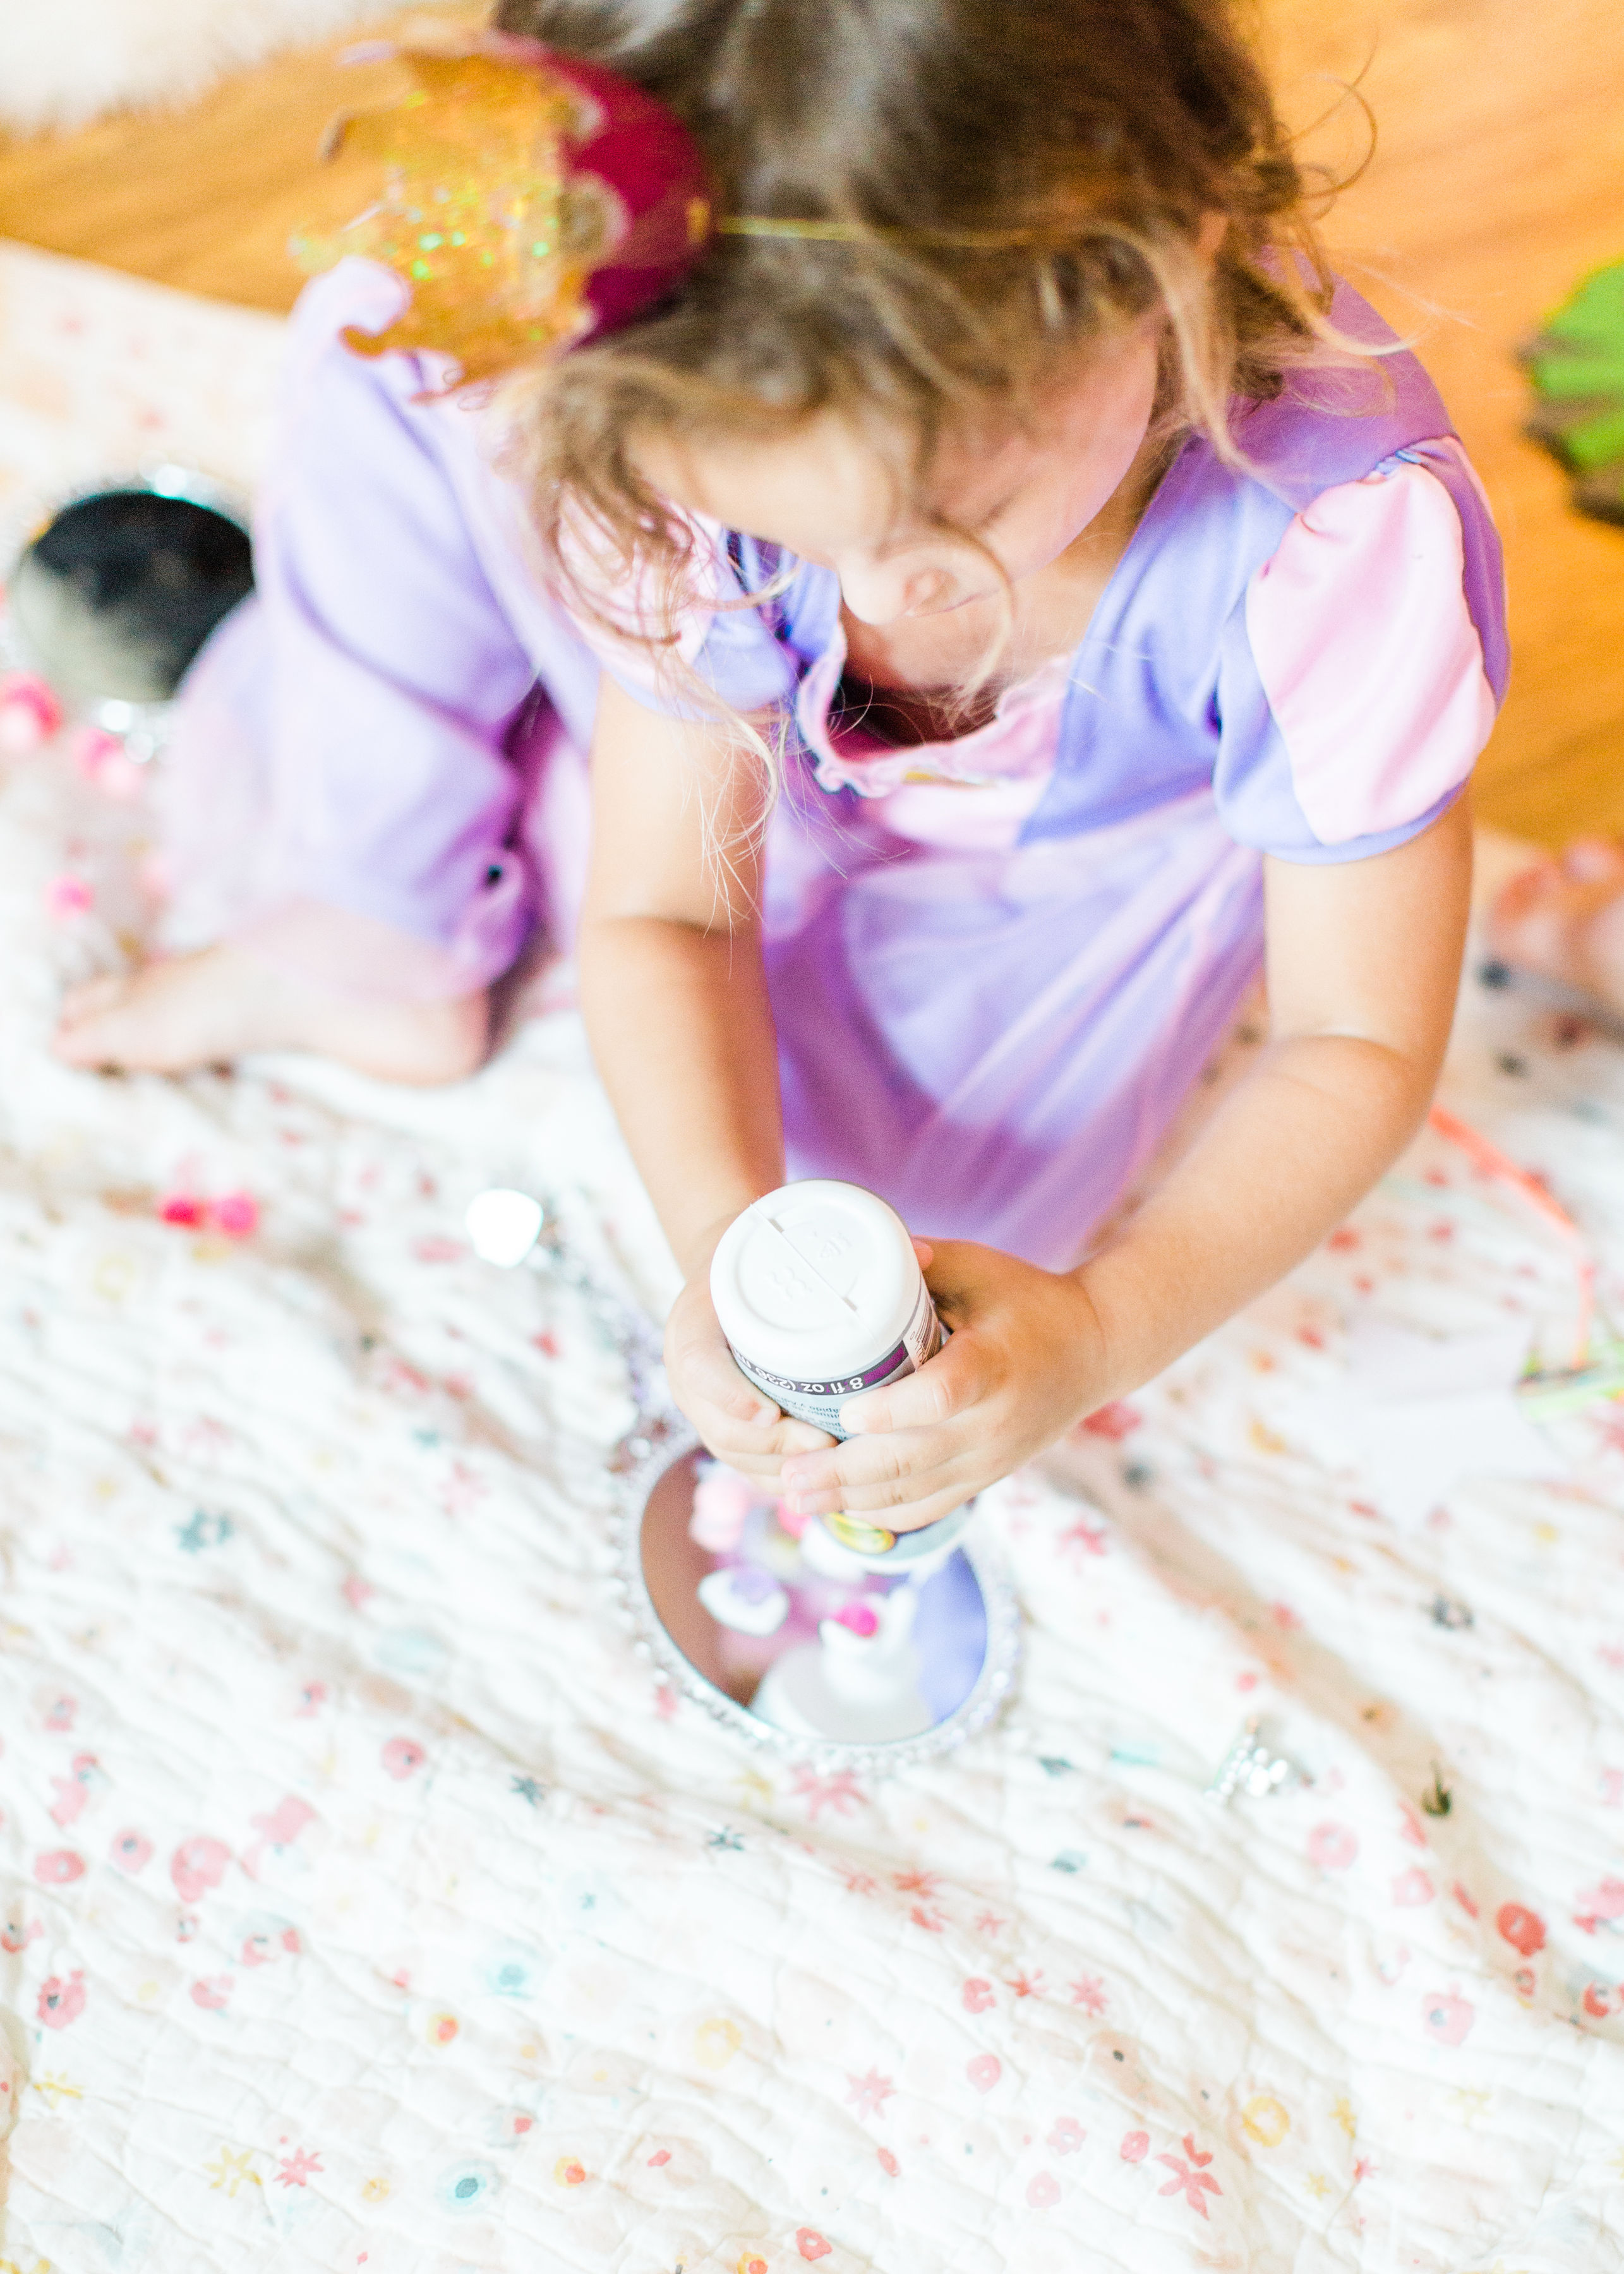 Ready to throw one beautiful and memorable princess pajama birthday party? Have we got some inspiration for you! We turned our living room into one giant slumber party and covered every available space with sheets, pillows, and blankets, plus gorgeous pink florals, a cozy tent lounge, a DIY magic mirror decorating activity for the kids, a dress-up station with crowns, wands, and wings, a pin the tail on the unicorn game, and so much more. Click through for the party details. #party #pajamaparty #princessparty #dressup | glitterinc.com | @glitterinc